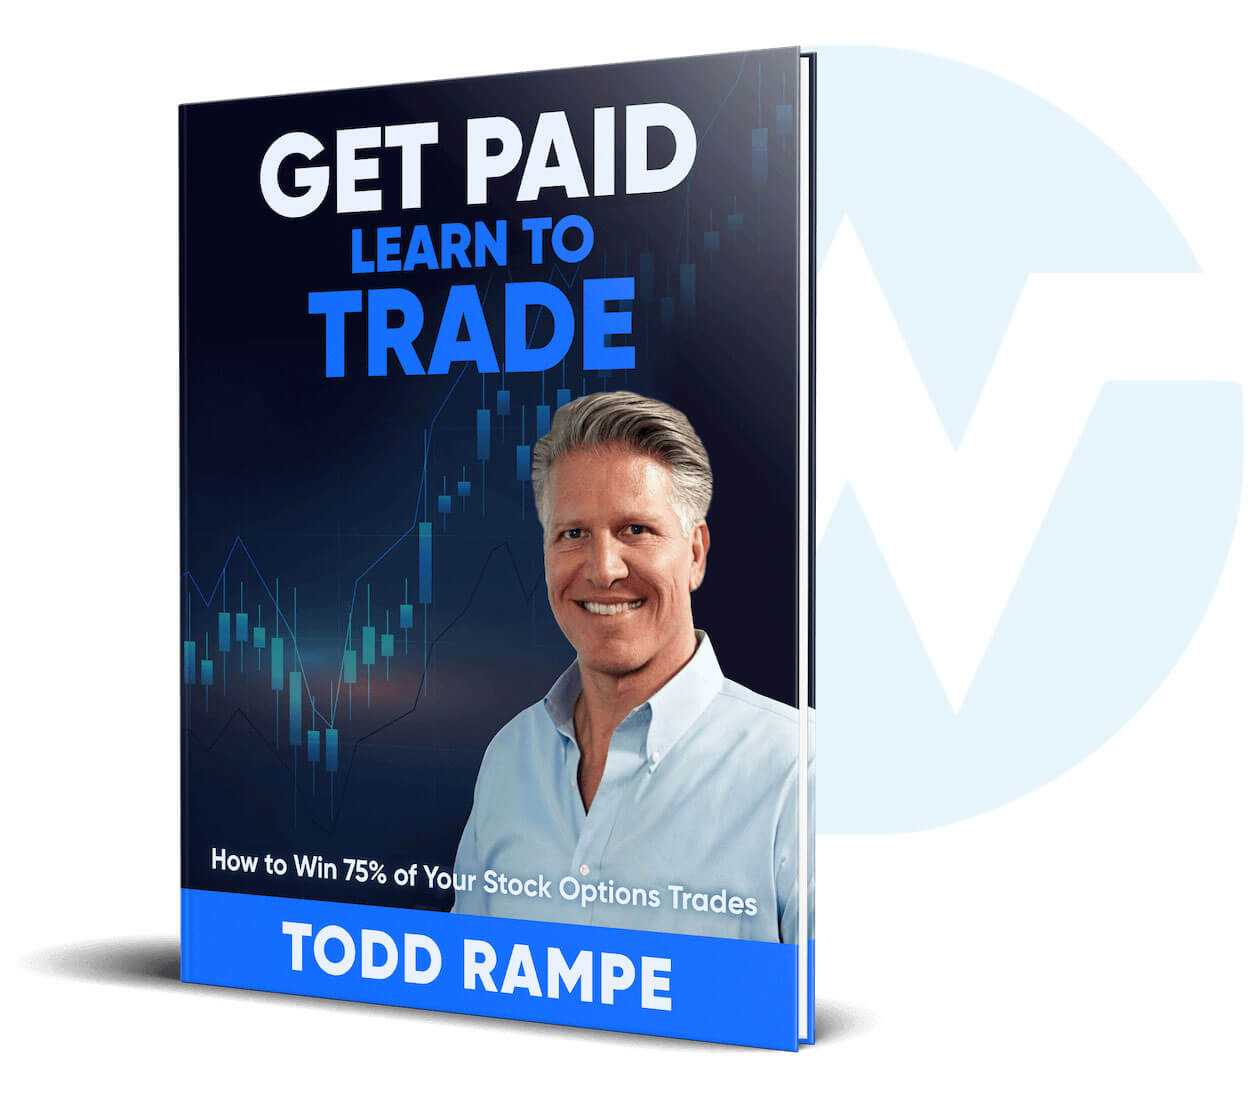 Get-Paid-Learn-to-Trade-eBook-Todd-Rampe